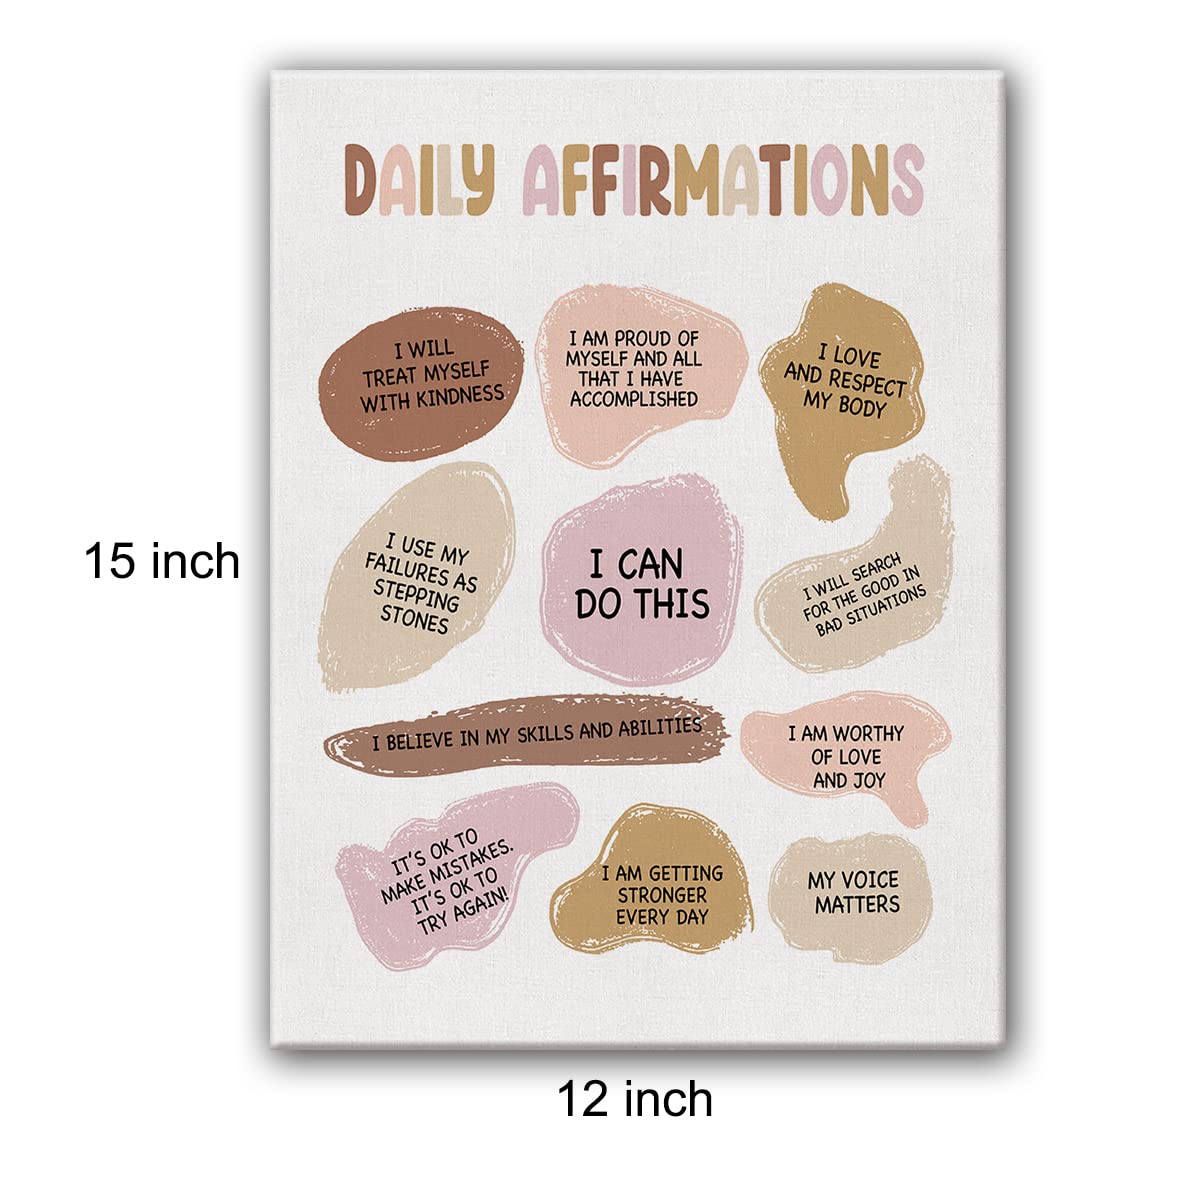 Yuzi-n Boho Daily Affirmations Print Poster Note to Self Mental Health Painting Canvas Wall Art & Tabletop Decoration Home Therapy Office Artwork, Easel & Hanging Hook 12x15Inch